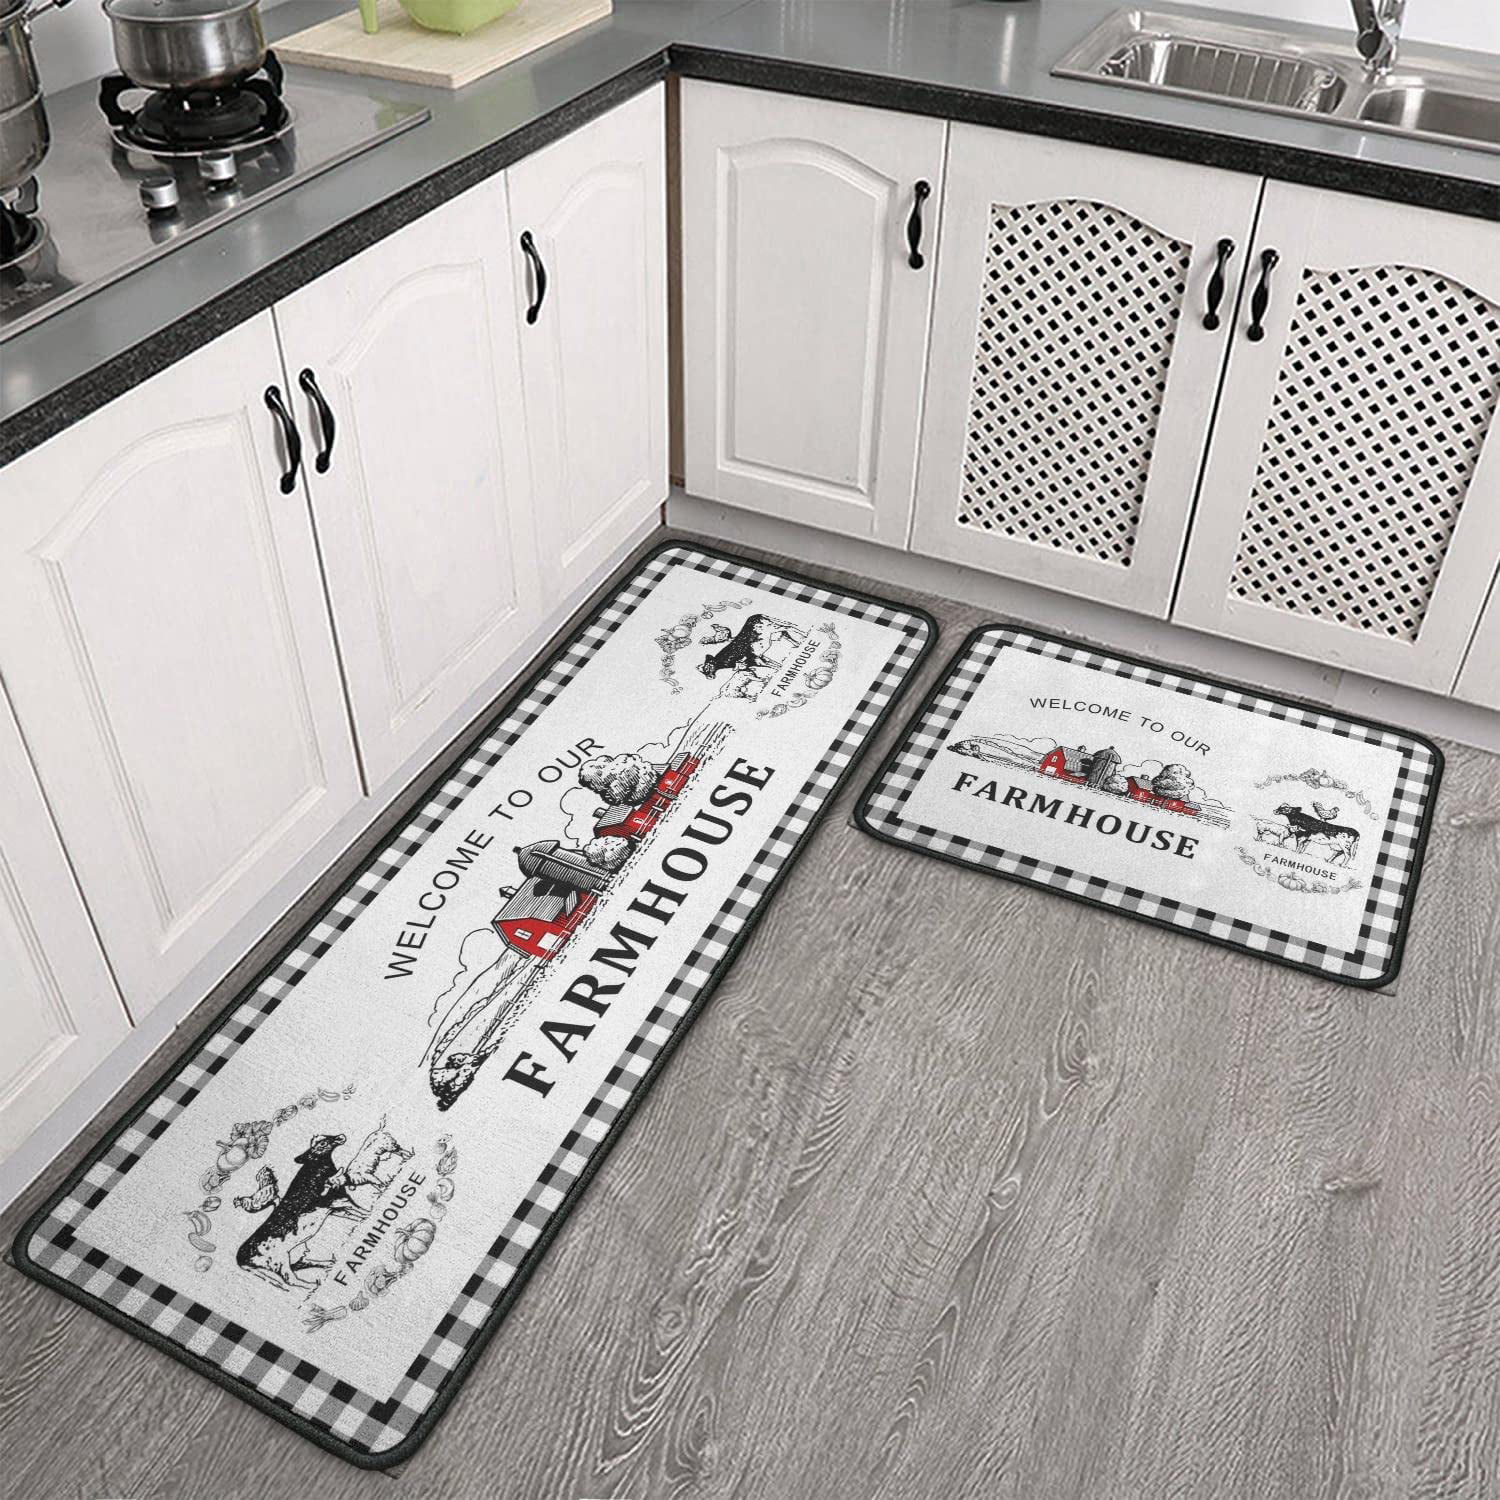 KOKHUB Kitchen Mats and Kitchen Rugs 2 Pieces Black and White, 17